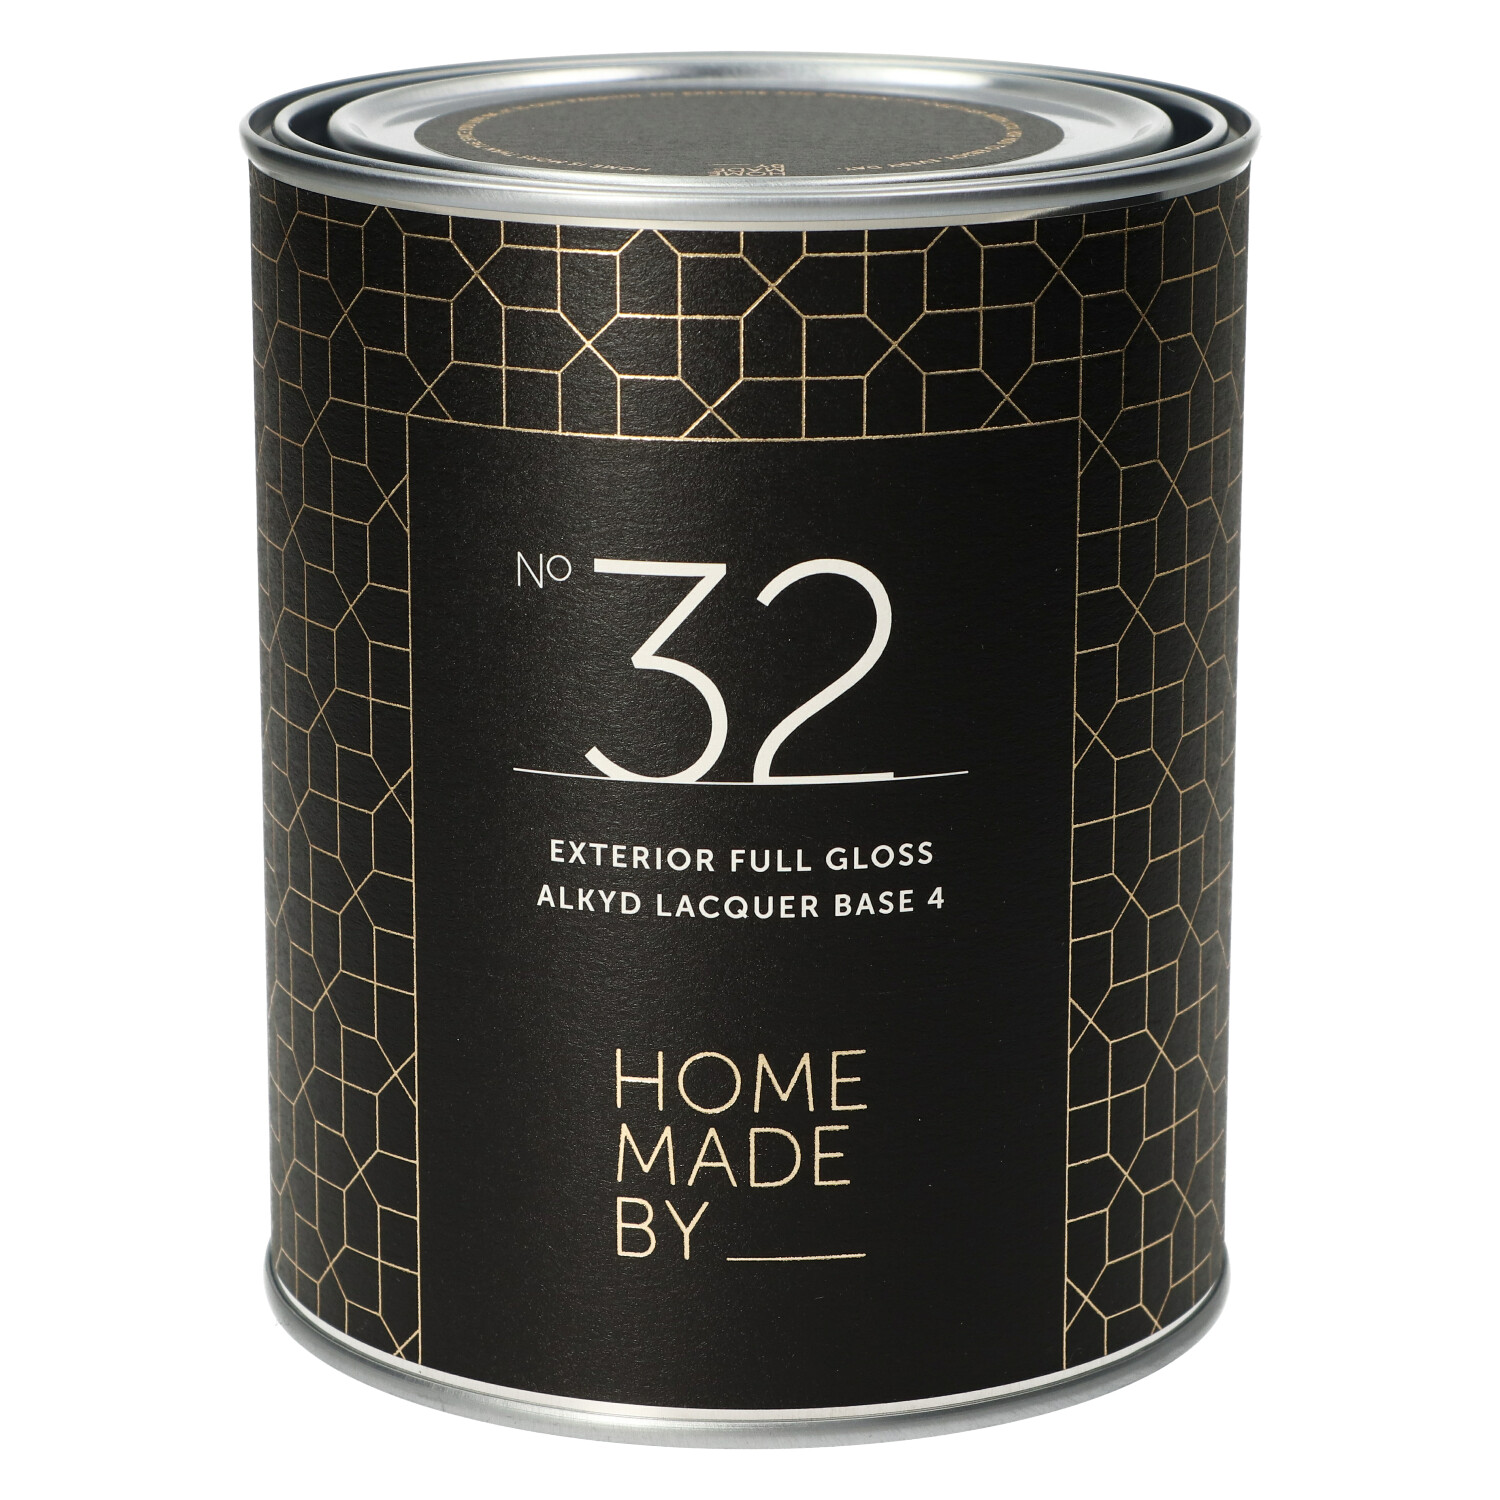 429023 - No.32 EXTERIOR FULL GLOSS ALKYD LACQUER - 1L op kleur gemengd tr/base 4